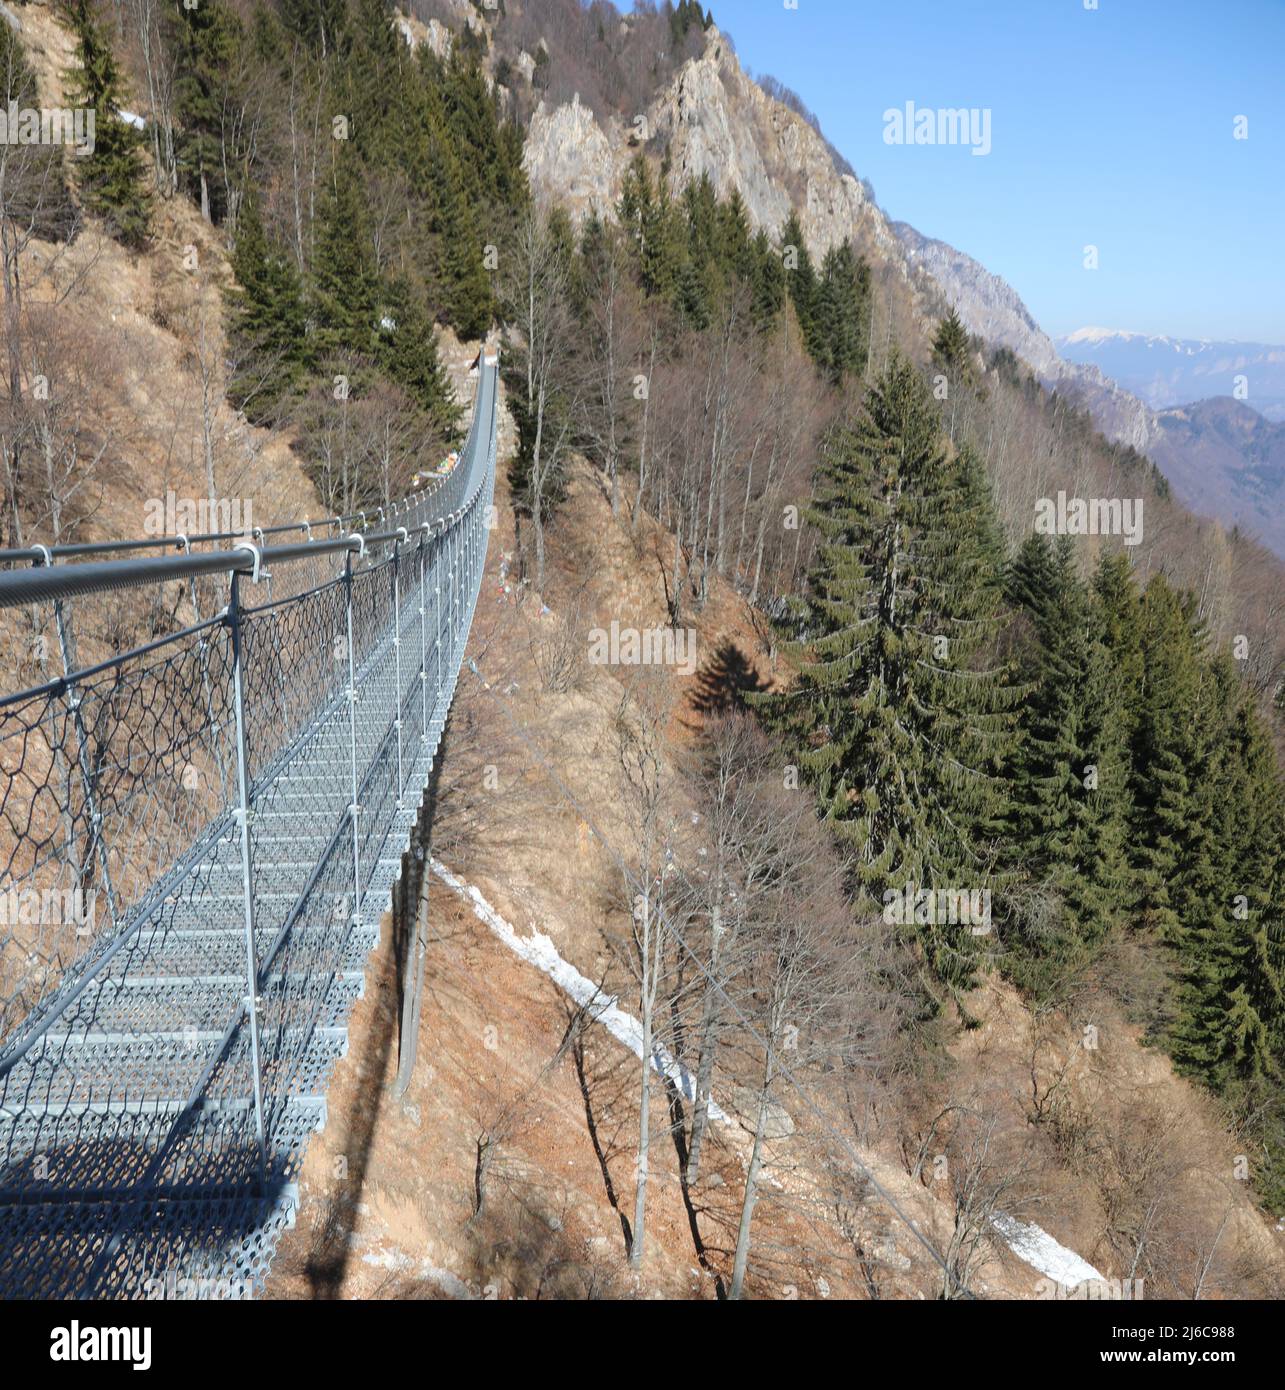 long suspension bridge over the valley between the mountains made with sturdy steel ropes Stock Photo